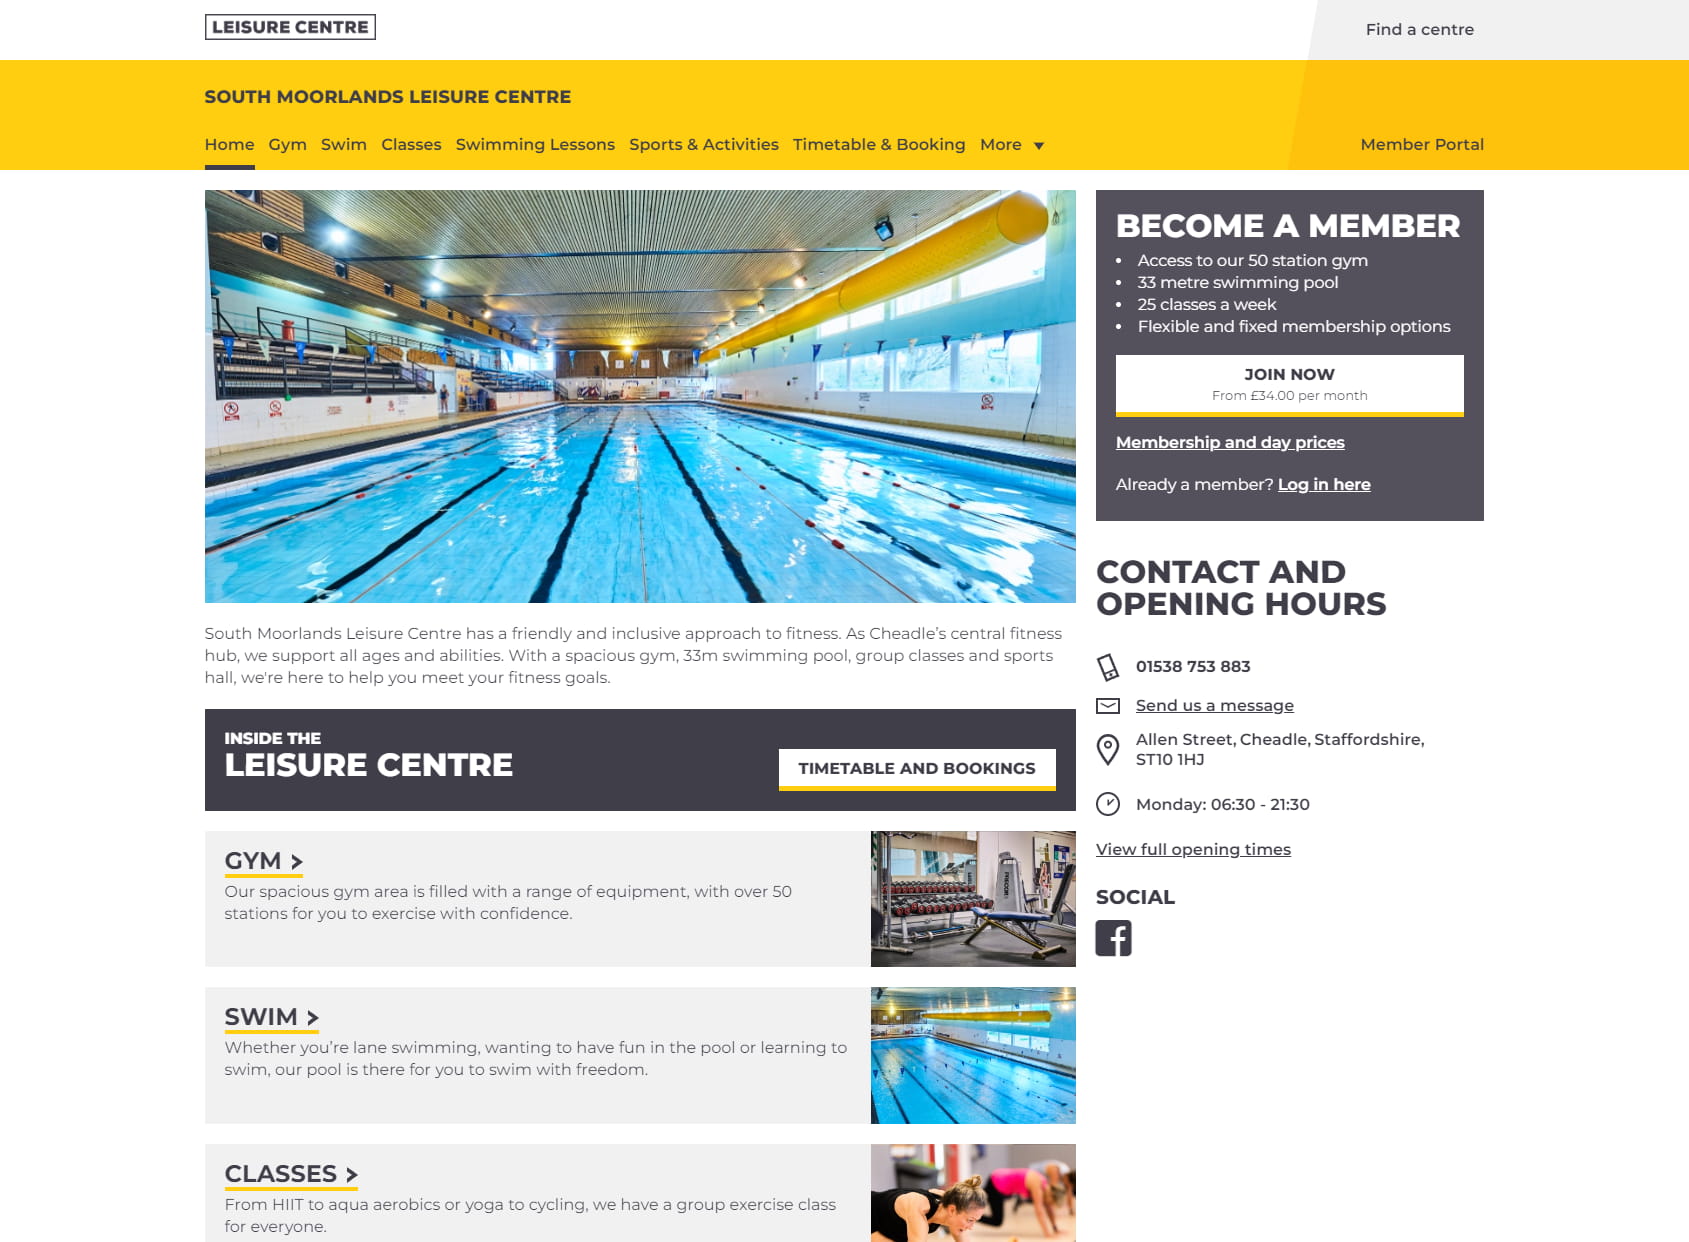 South Moorlands Leisure Centre